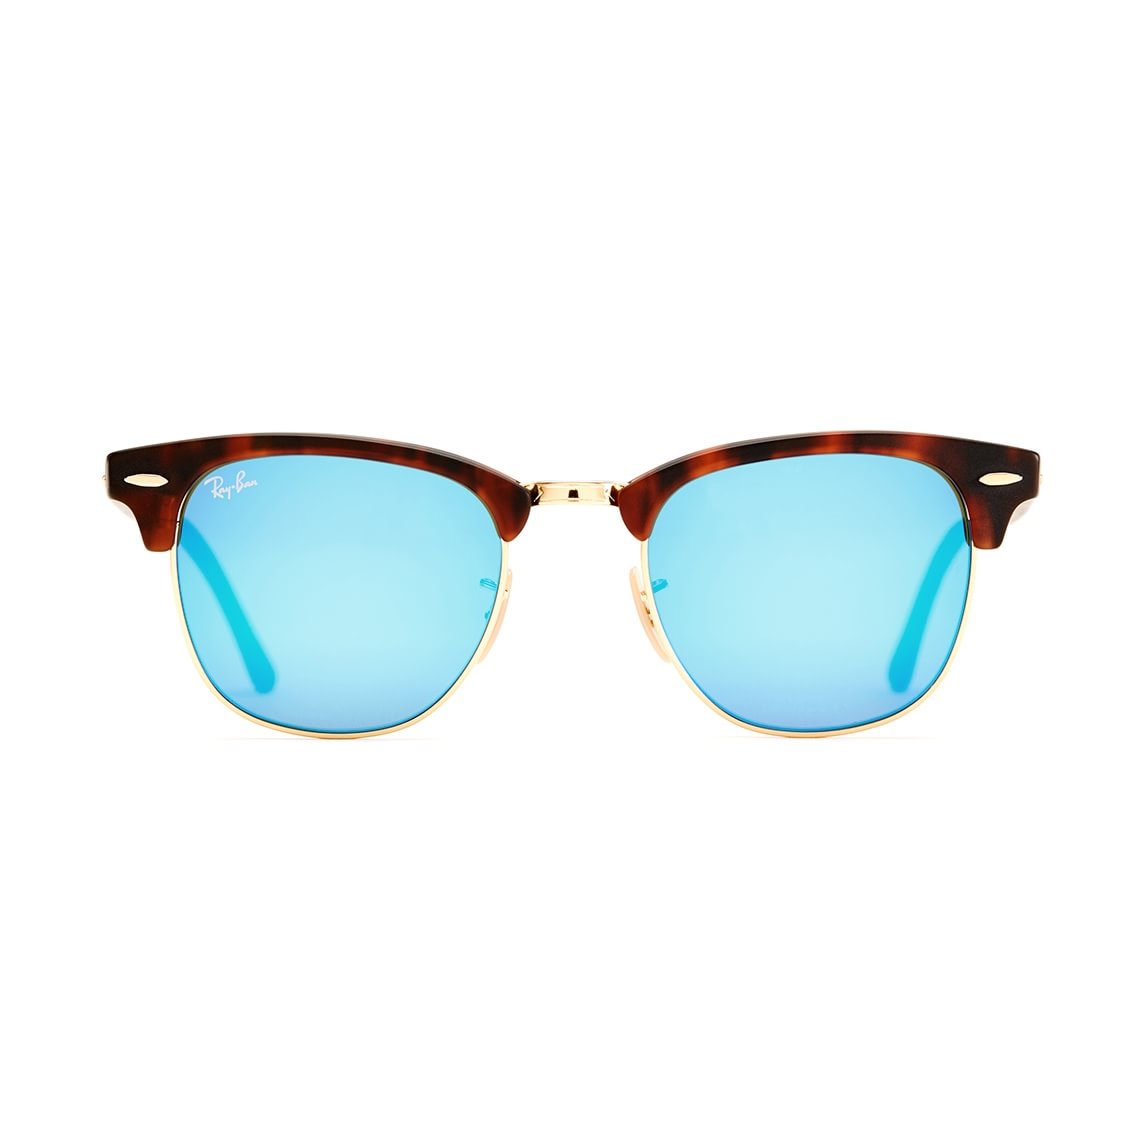 Ray-Ban Clubmaster RB3016 114517 51